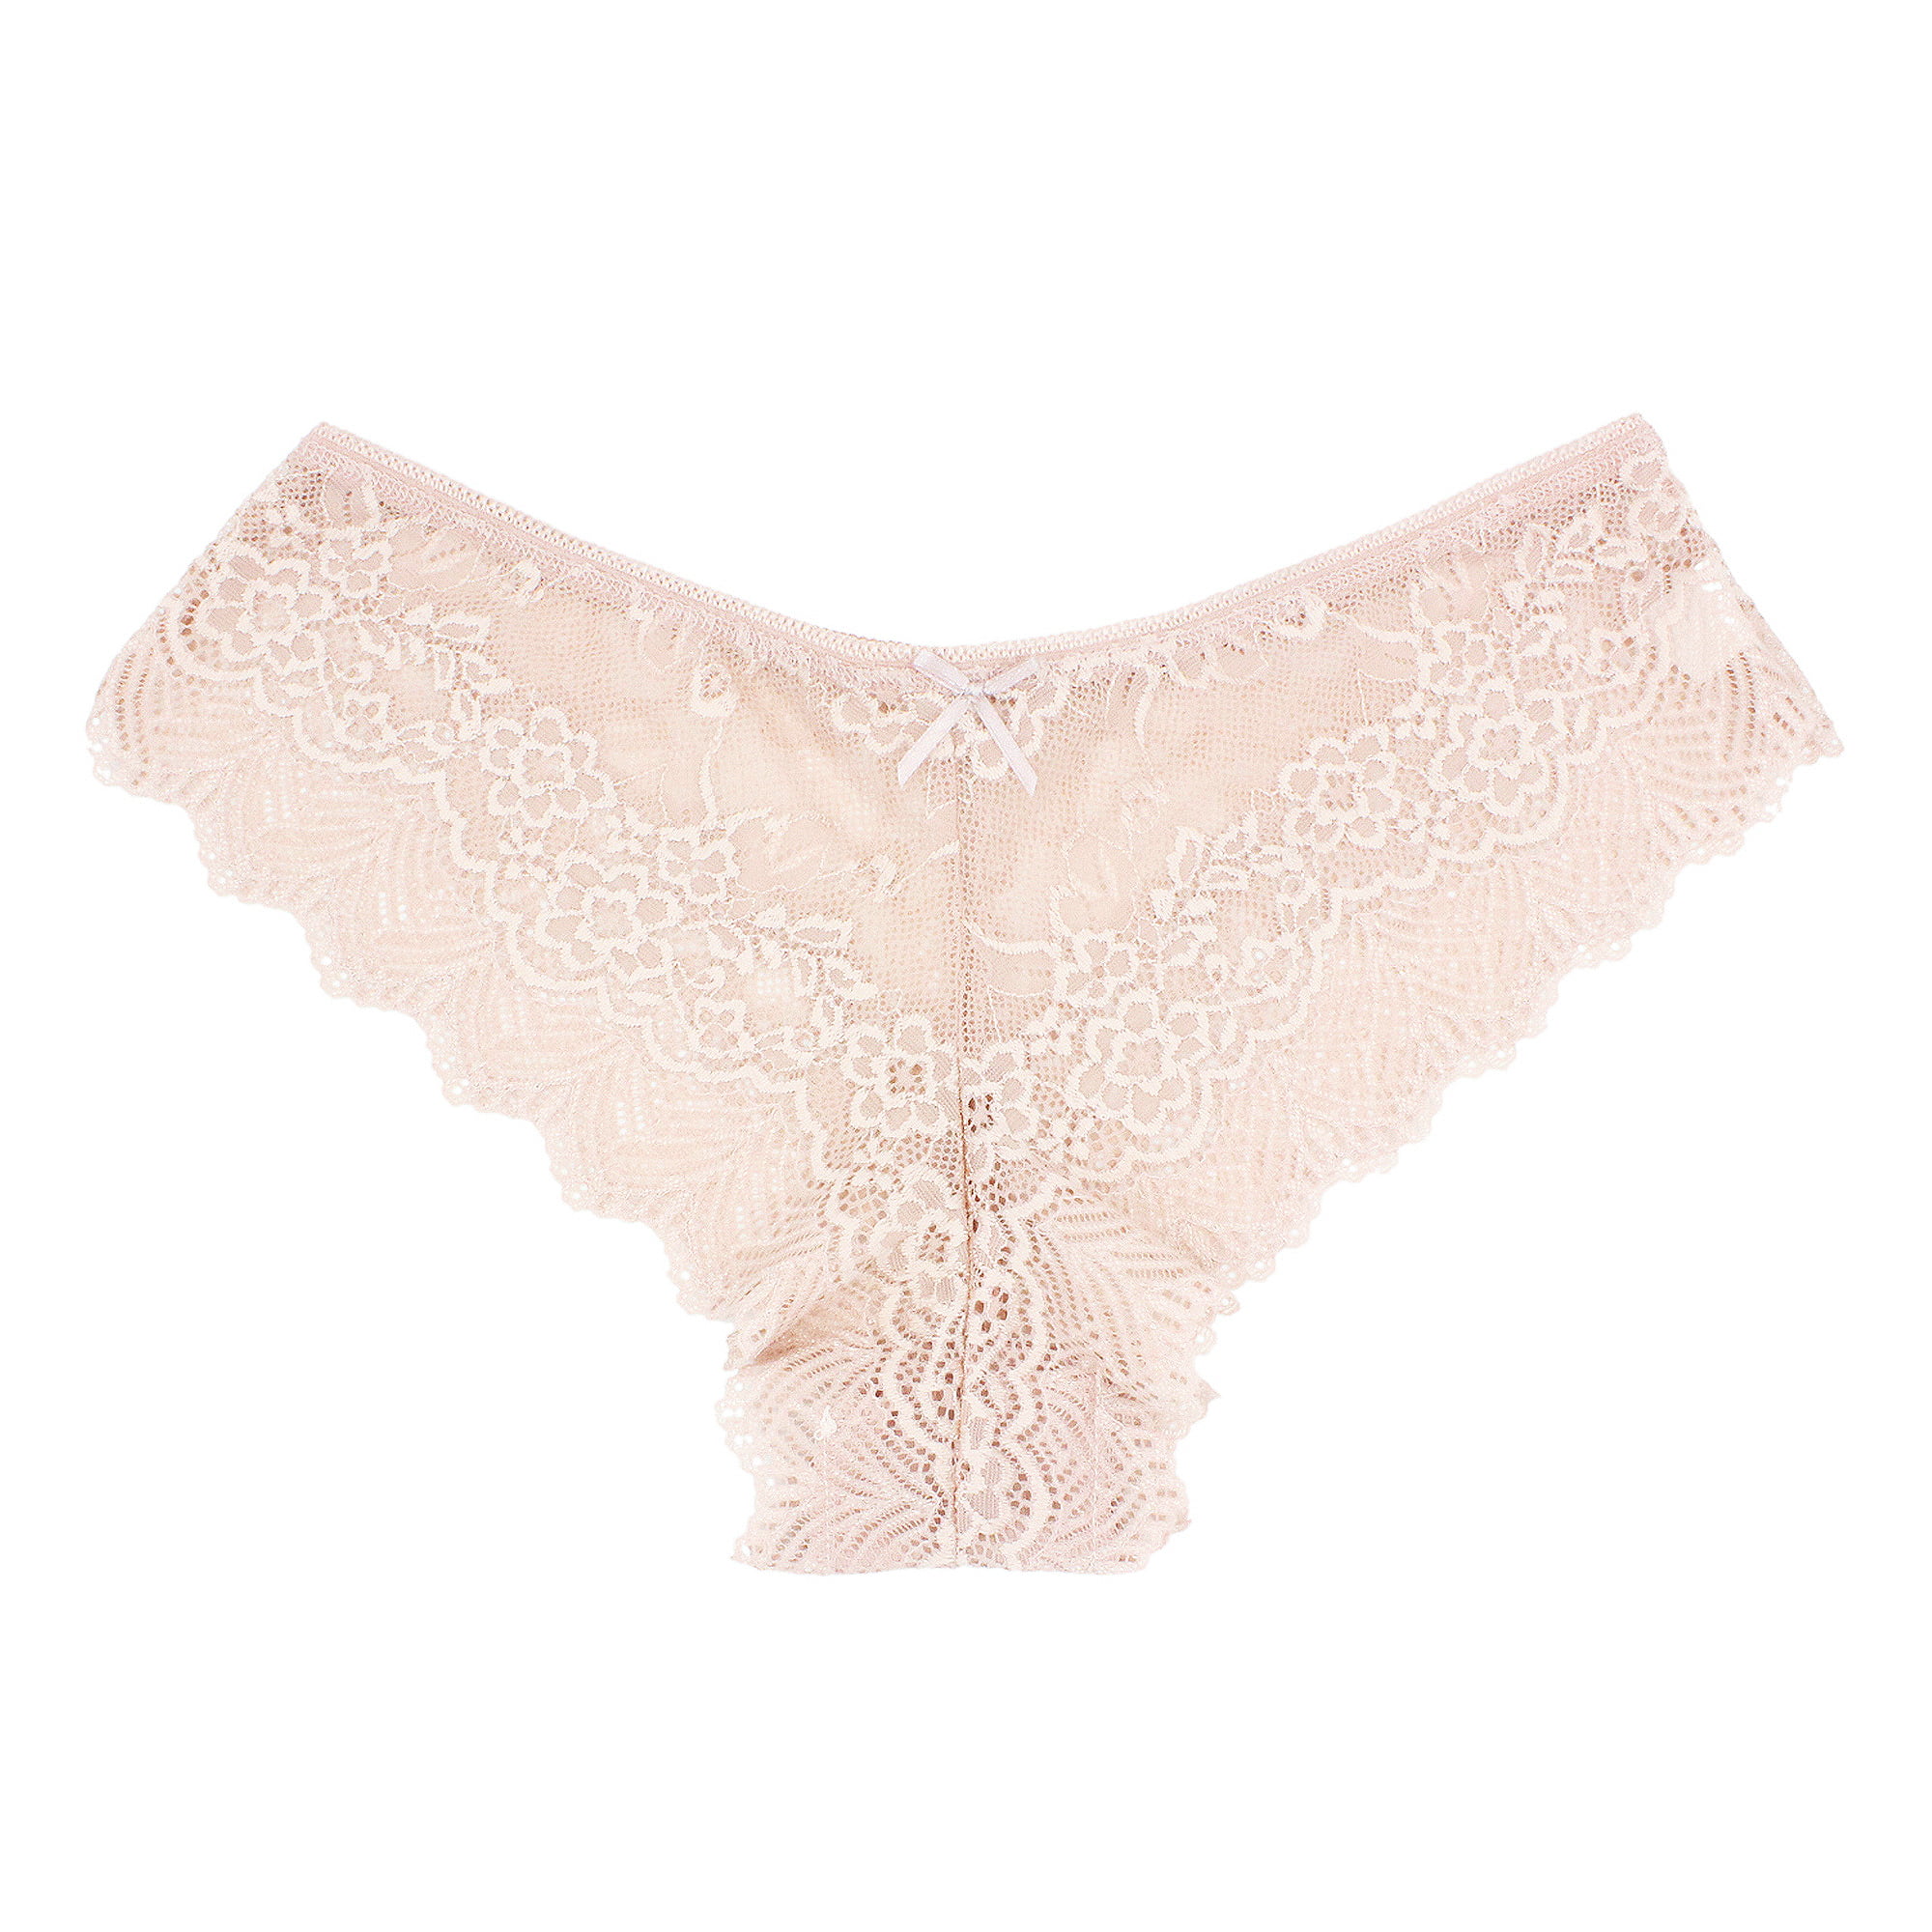  Fitora Lace Panties 3 Pack Pink/Black/White (Small/Medium) :  Clothing, Shoes & Jewelry